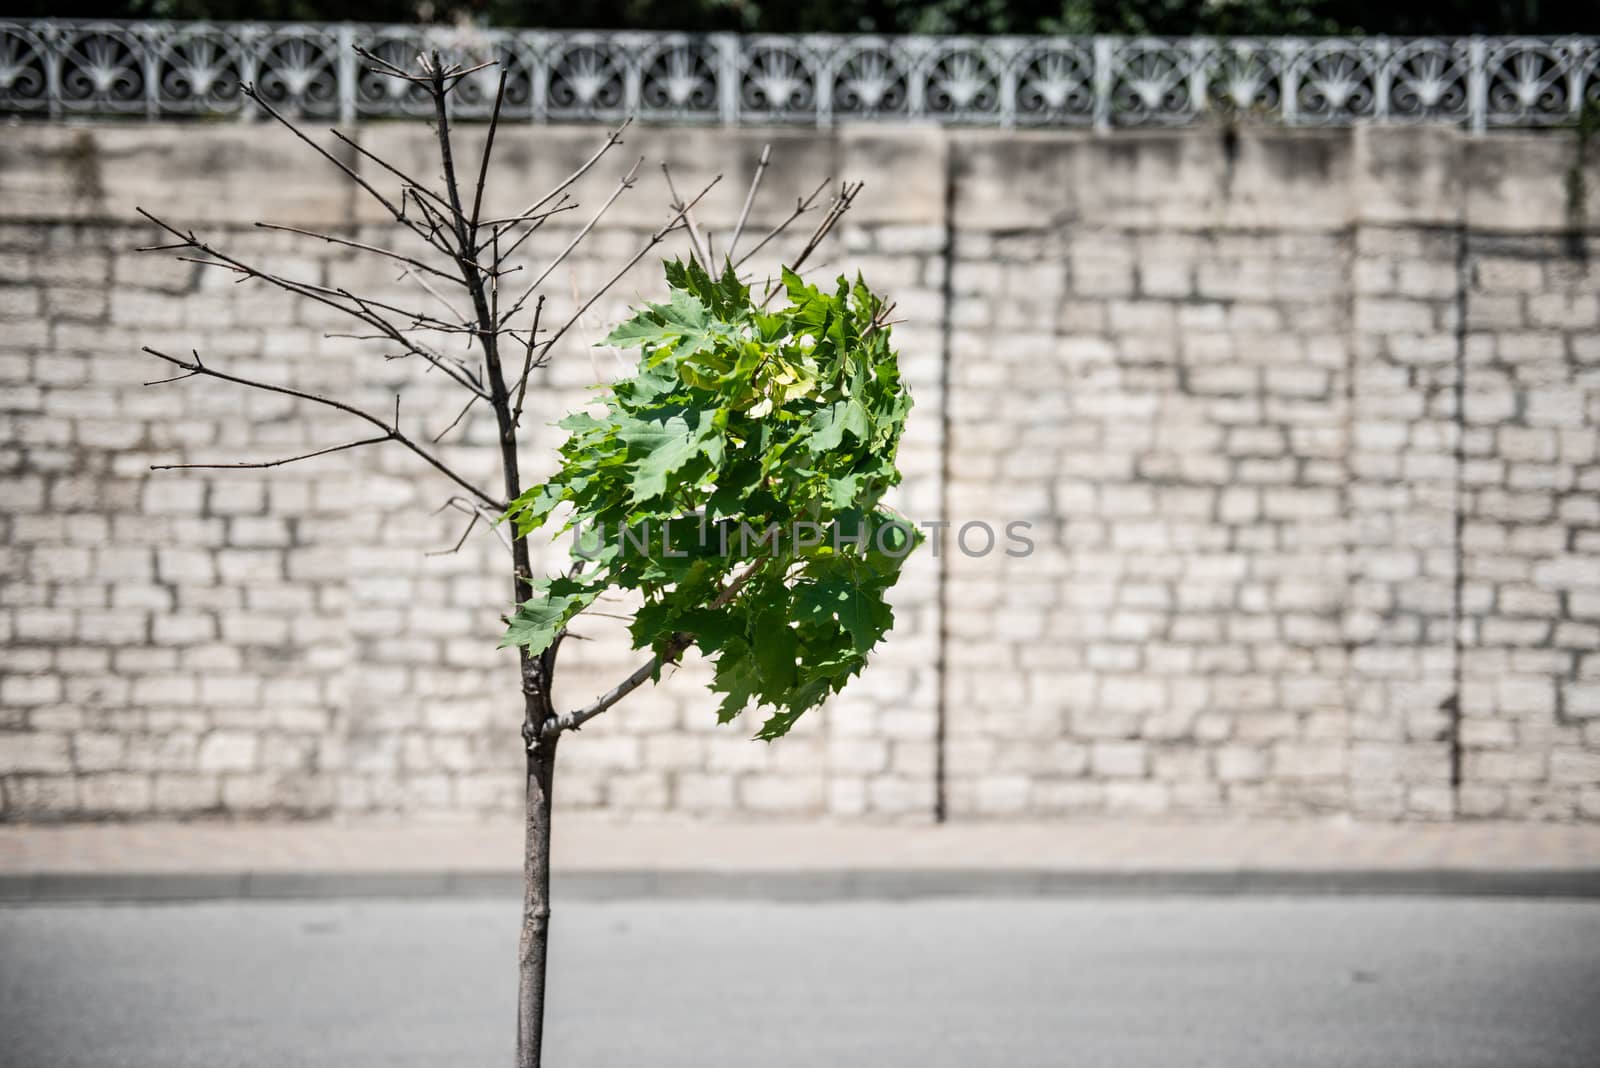 Lonely green tree wind resistance on brick background